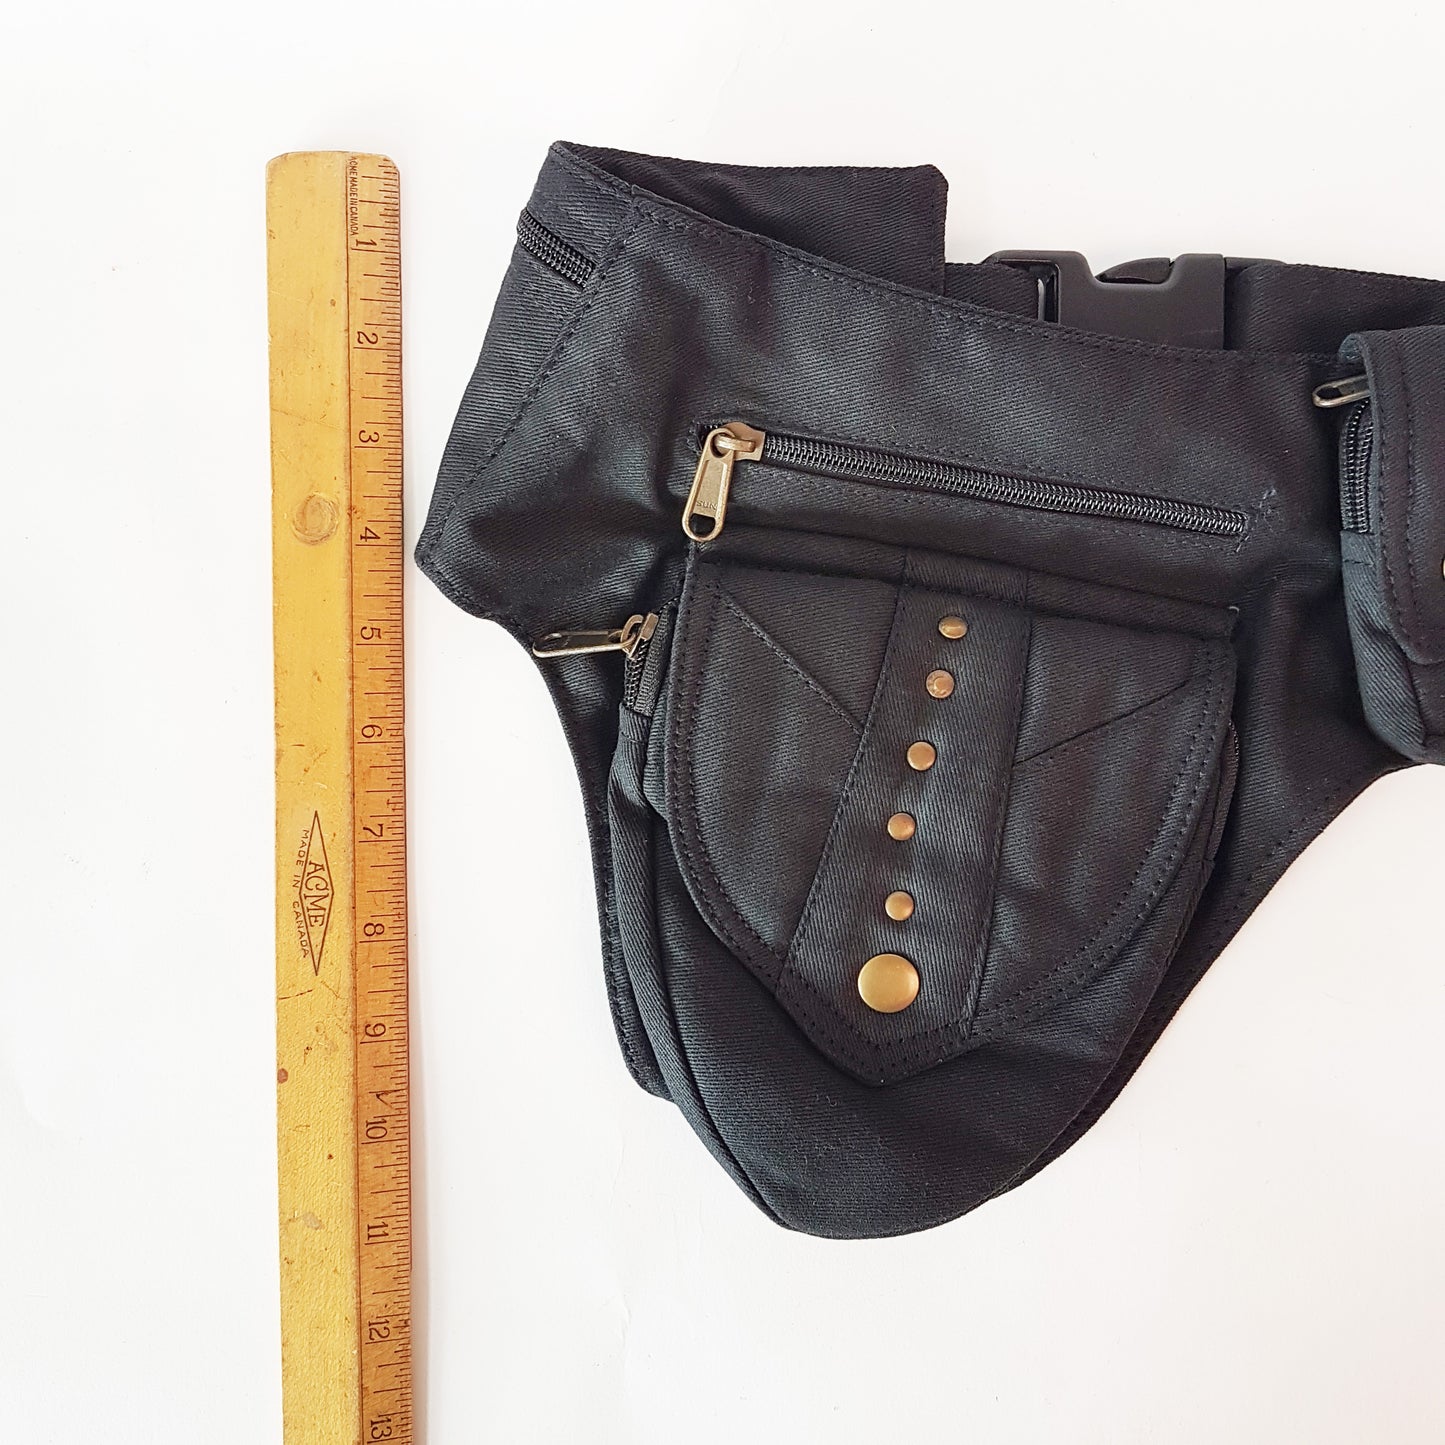 Utility festival pocket belt gray. Adjusts to 48 inches. Unisex design waist-hip-bum bag. Use as travel & shopping money belt. 4 zip pockets. Adjustable to 48 inches.